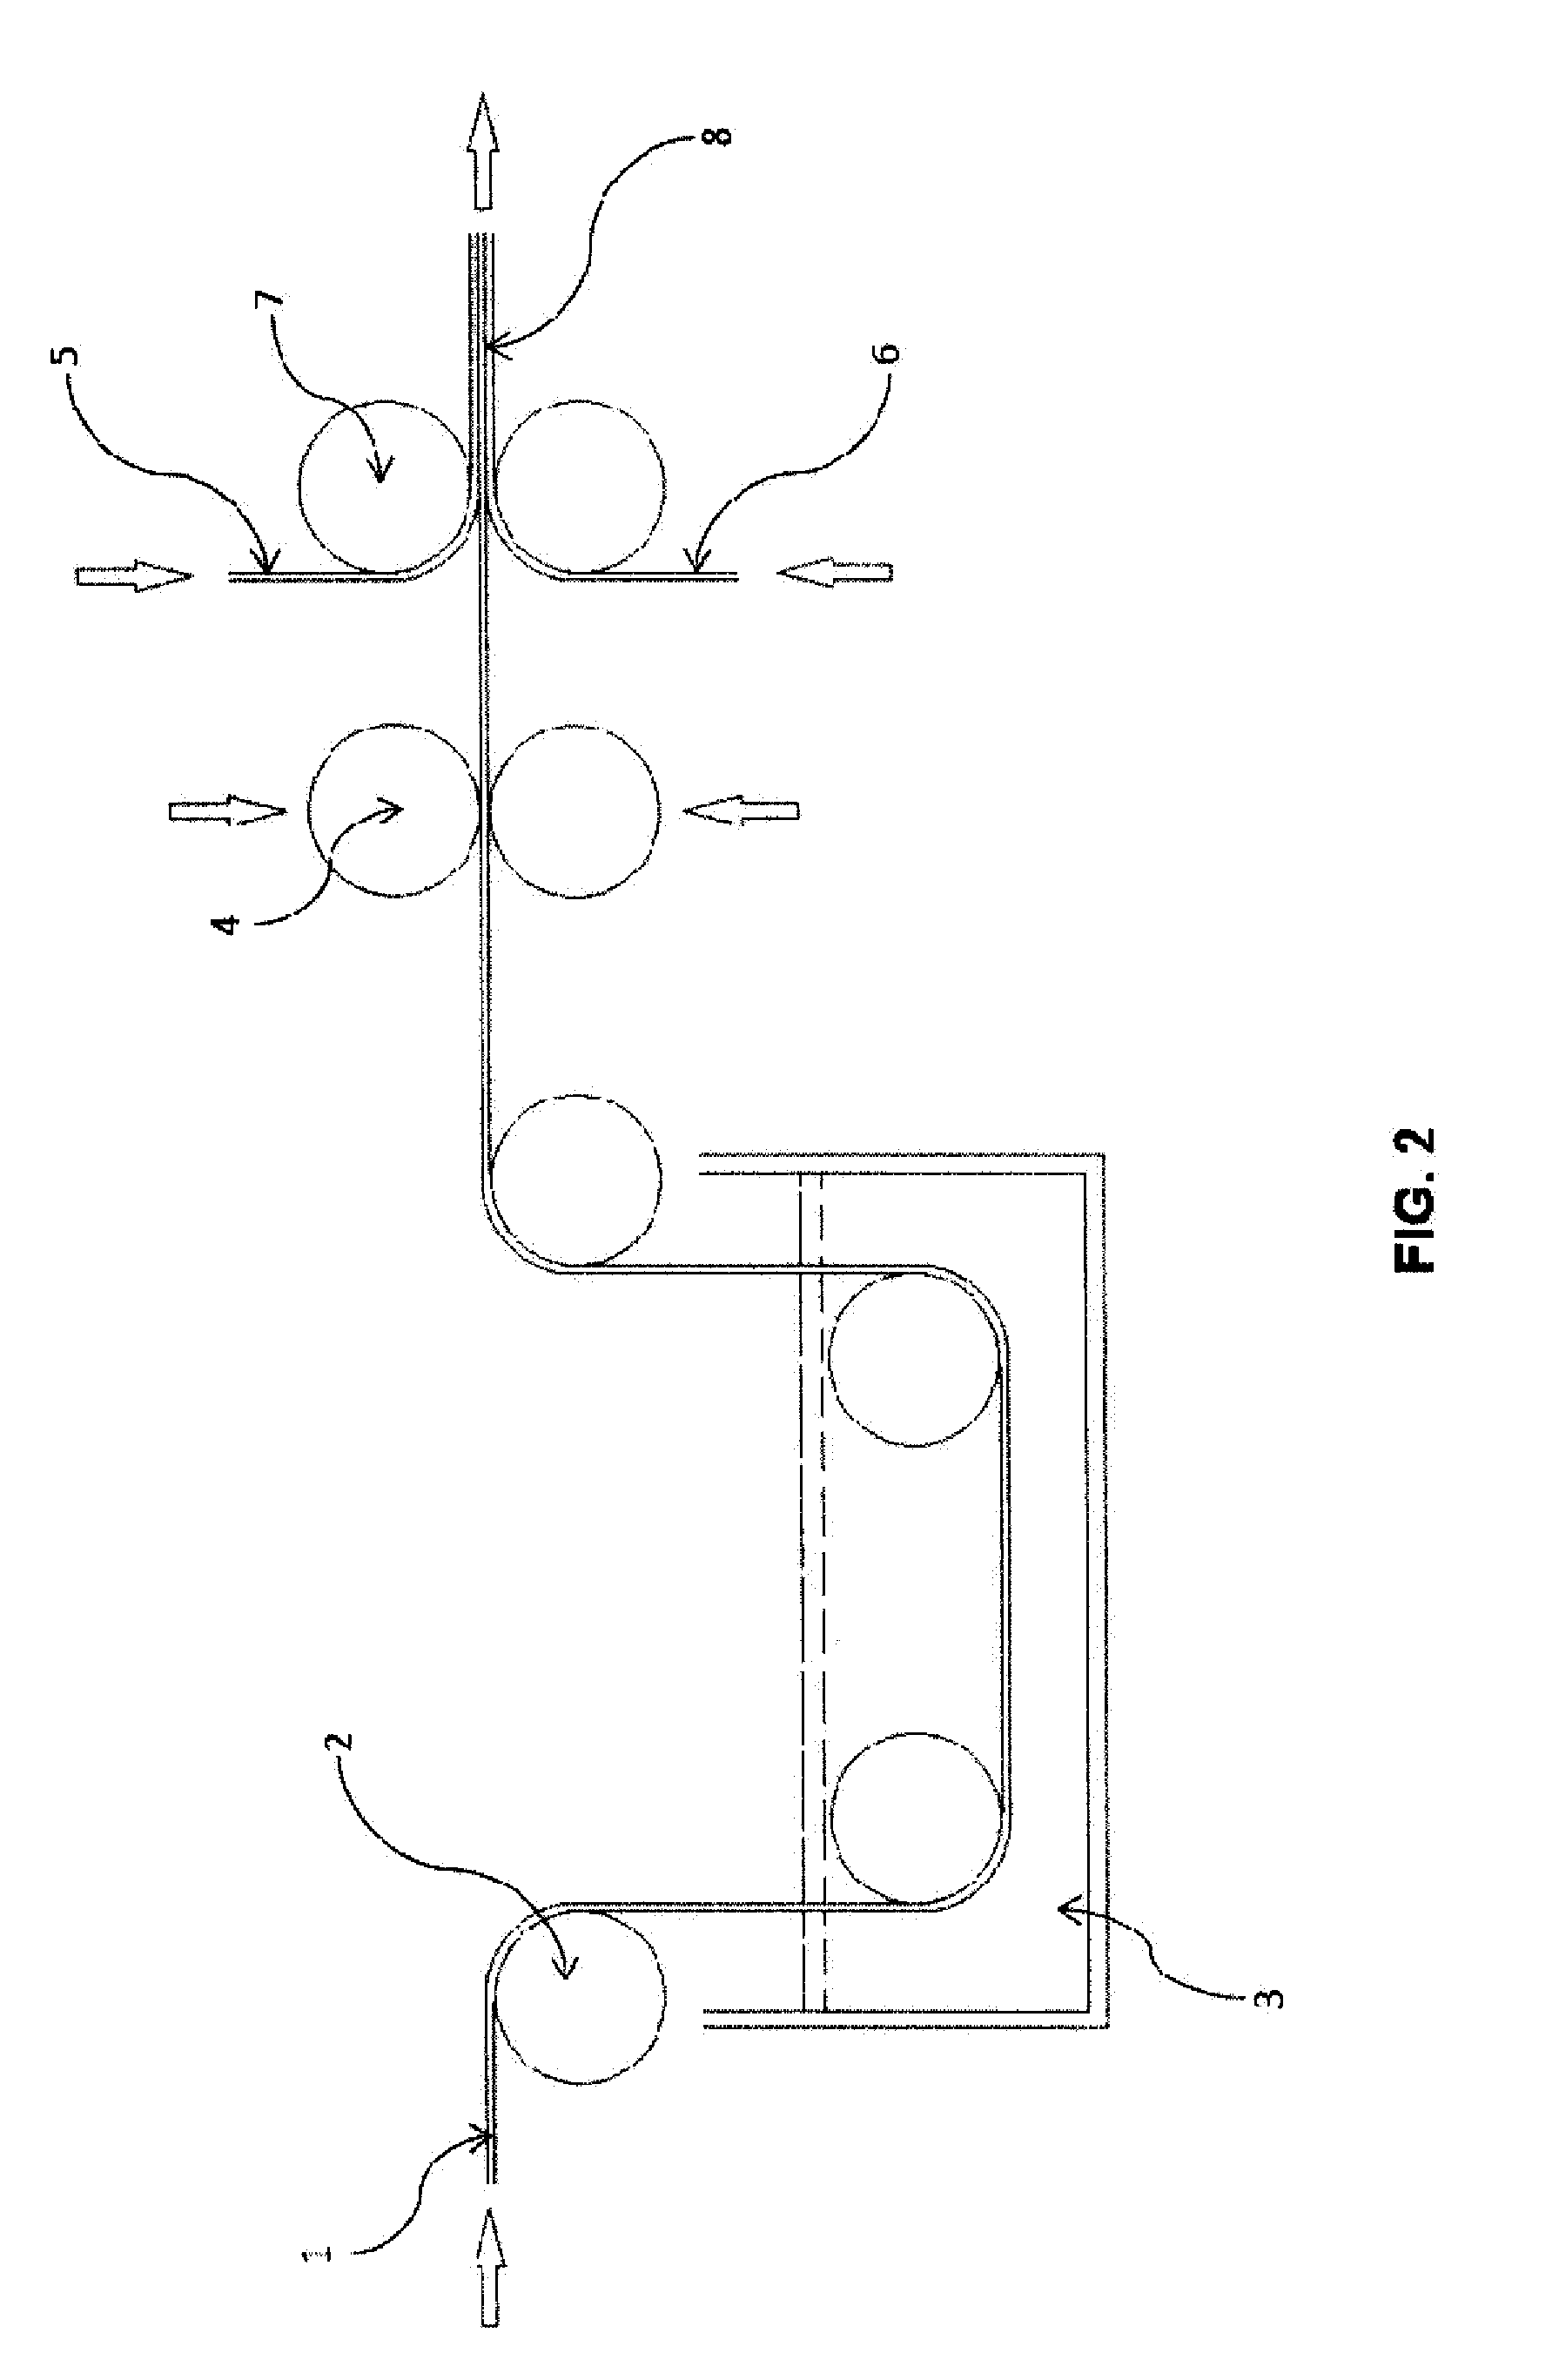 Nanomaterial based fabric reinforced with prepreg methods, and composite articles formed therefrom